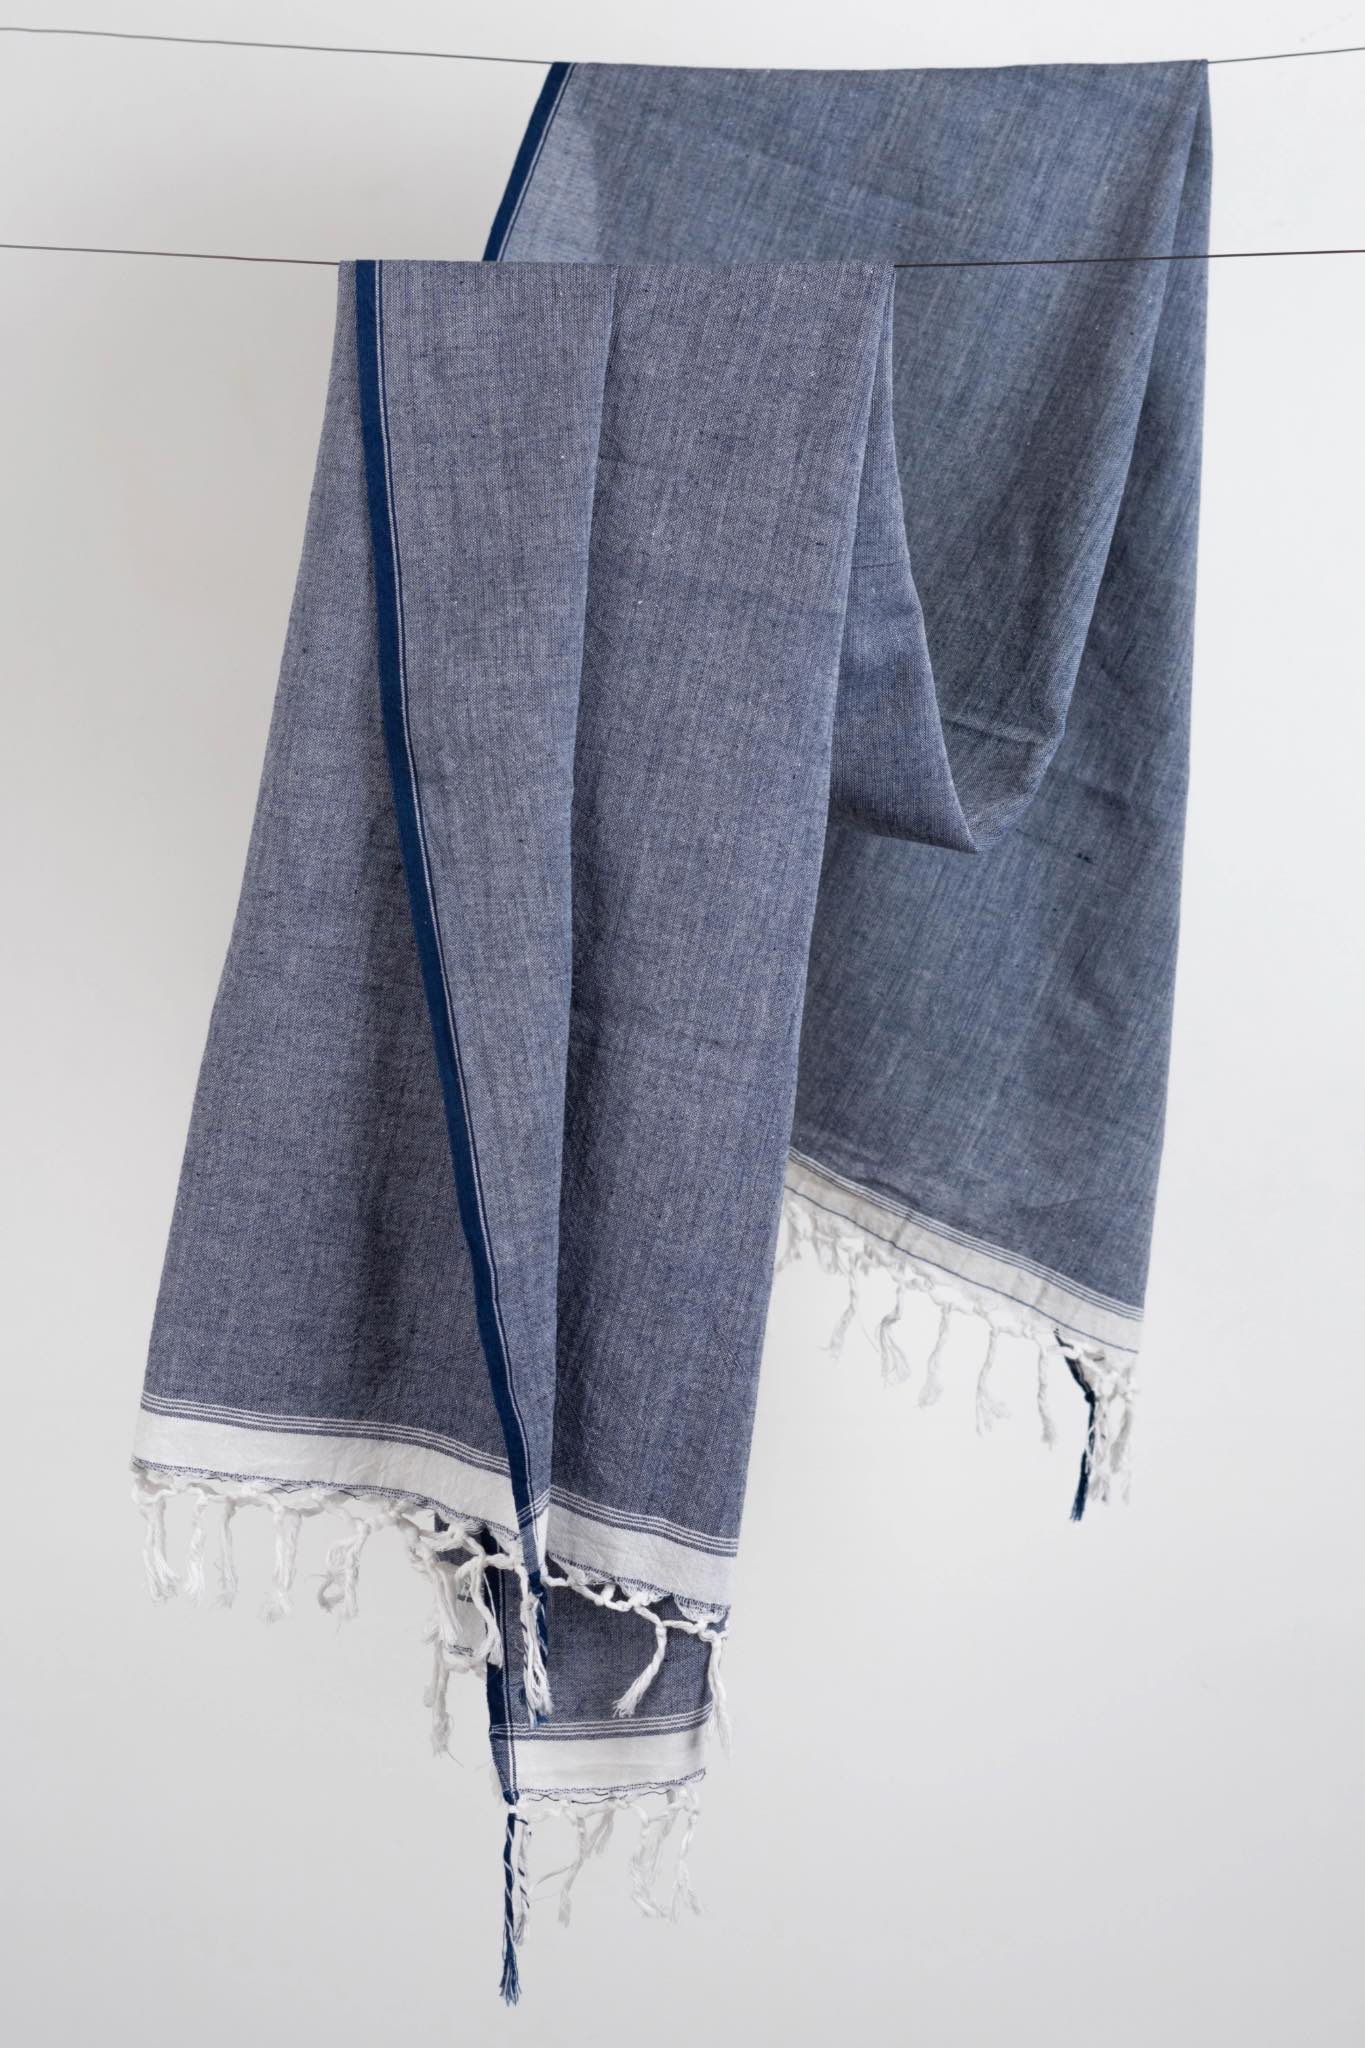 Hand-woven Cotton Towel - Blue Chambray, Super soft and absorbent